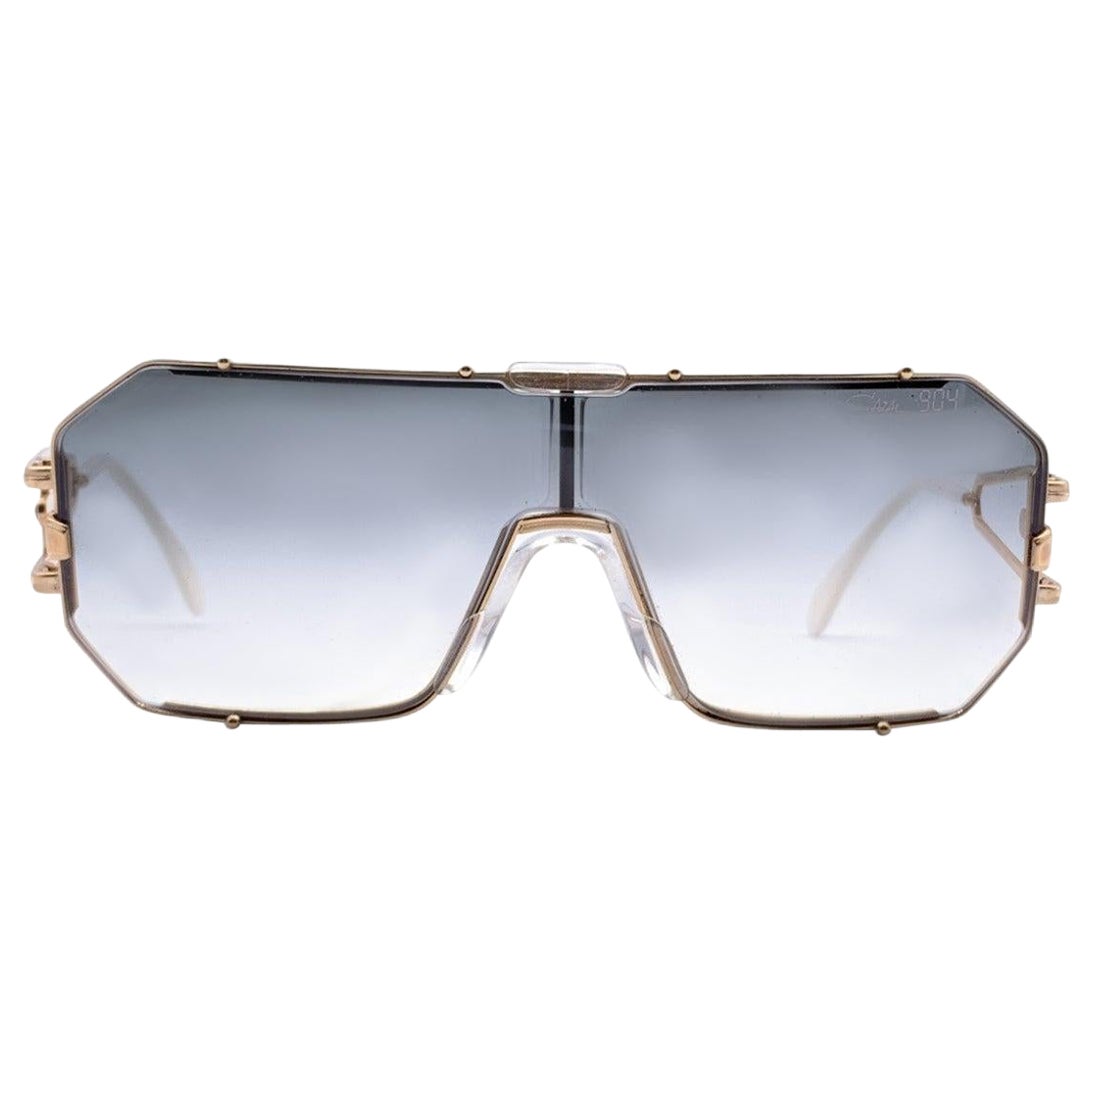 Cazal Gold Metal Sunglasses Mod. 904 Col 97 125 mm with Extra Lens For Sale